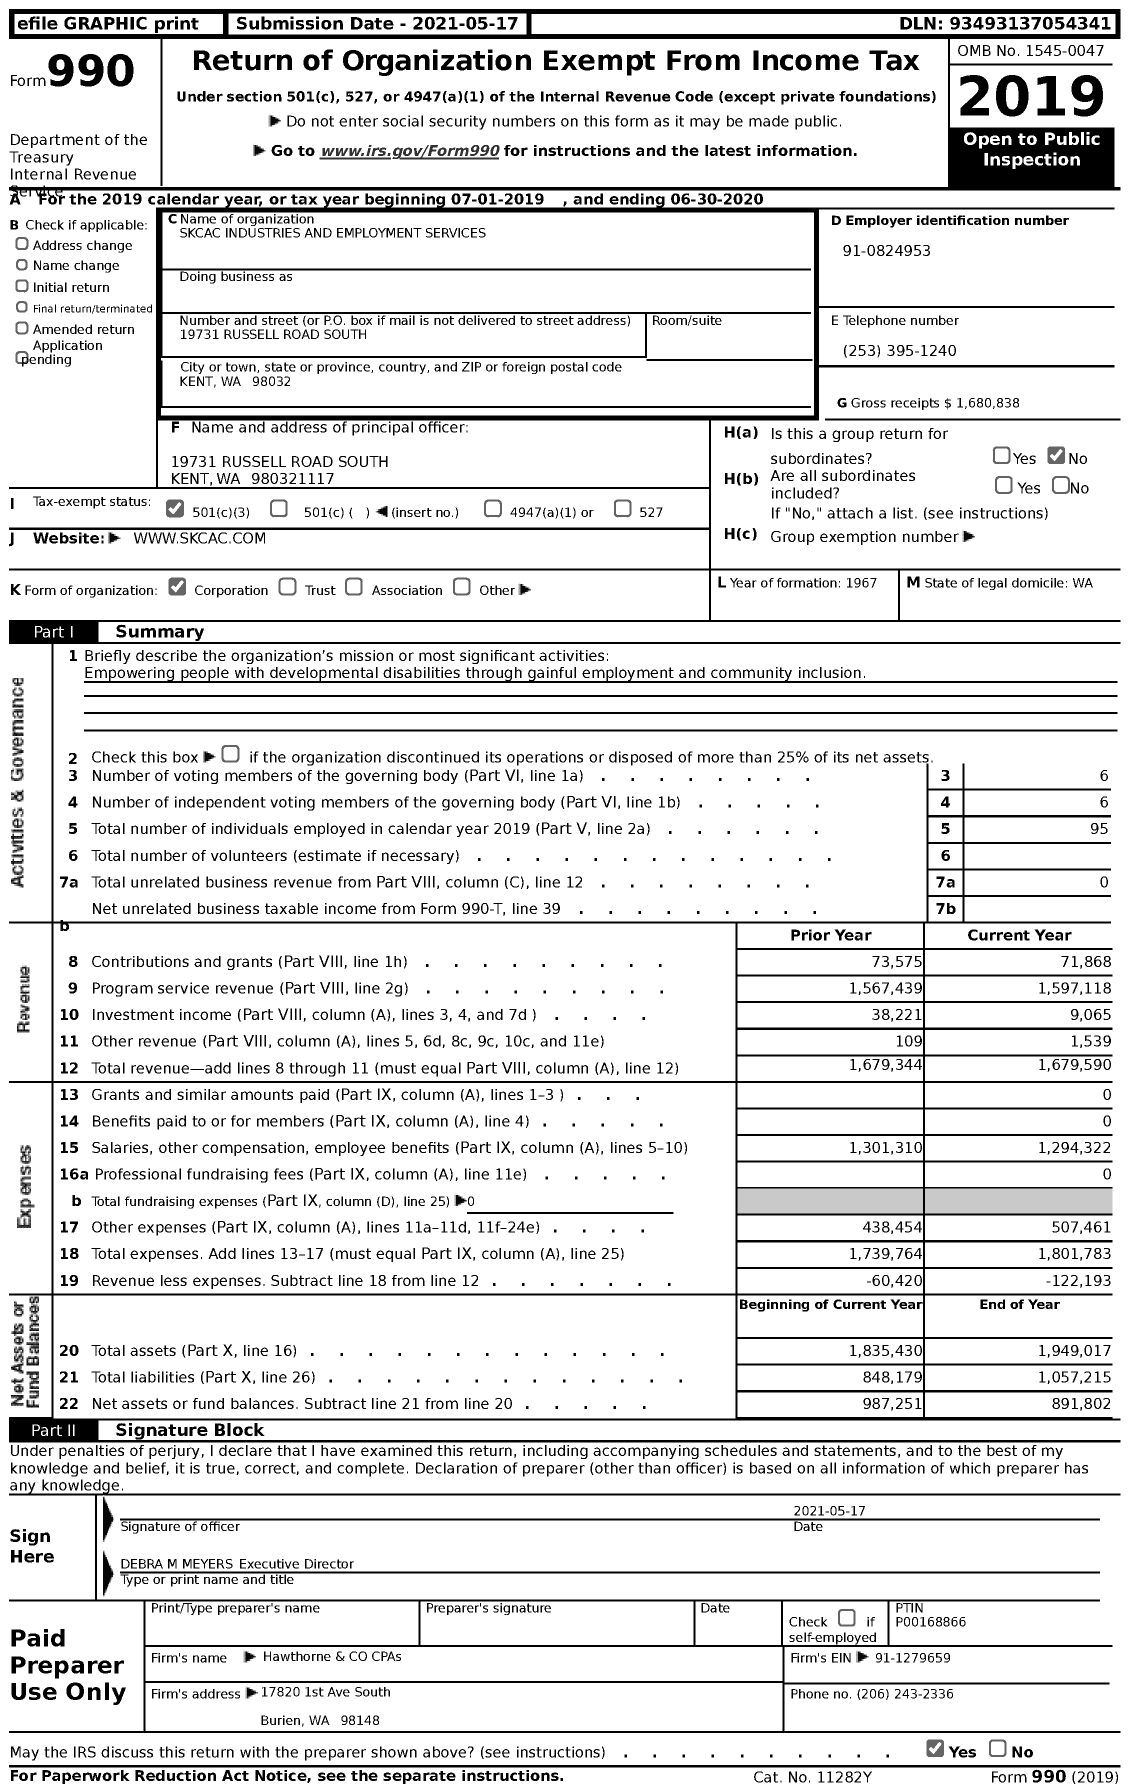 Image of first page of 2019 Form 990 for Skcac Industries and Employment Services